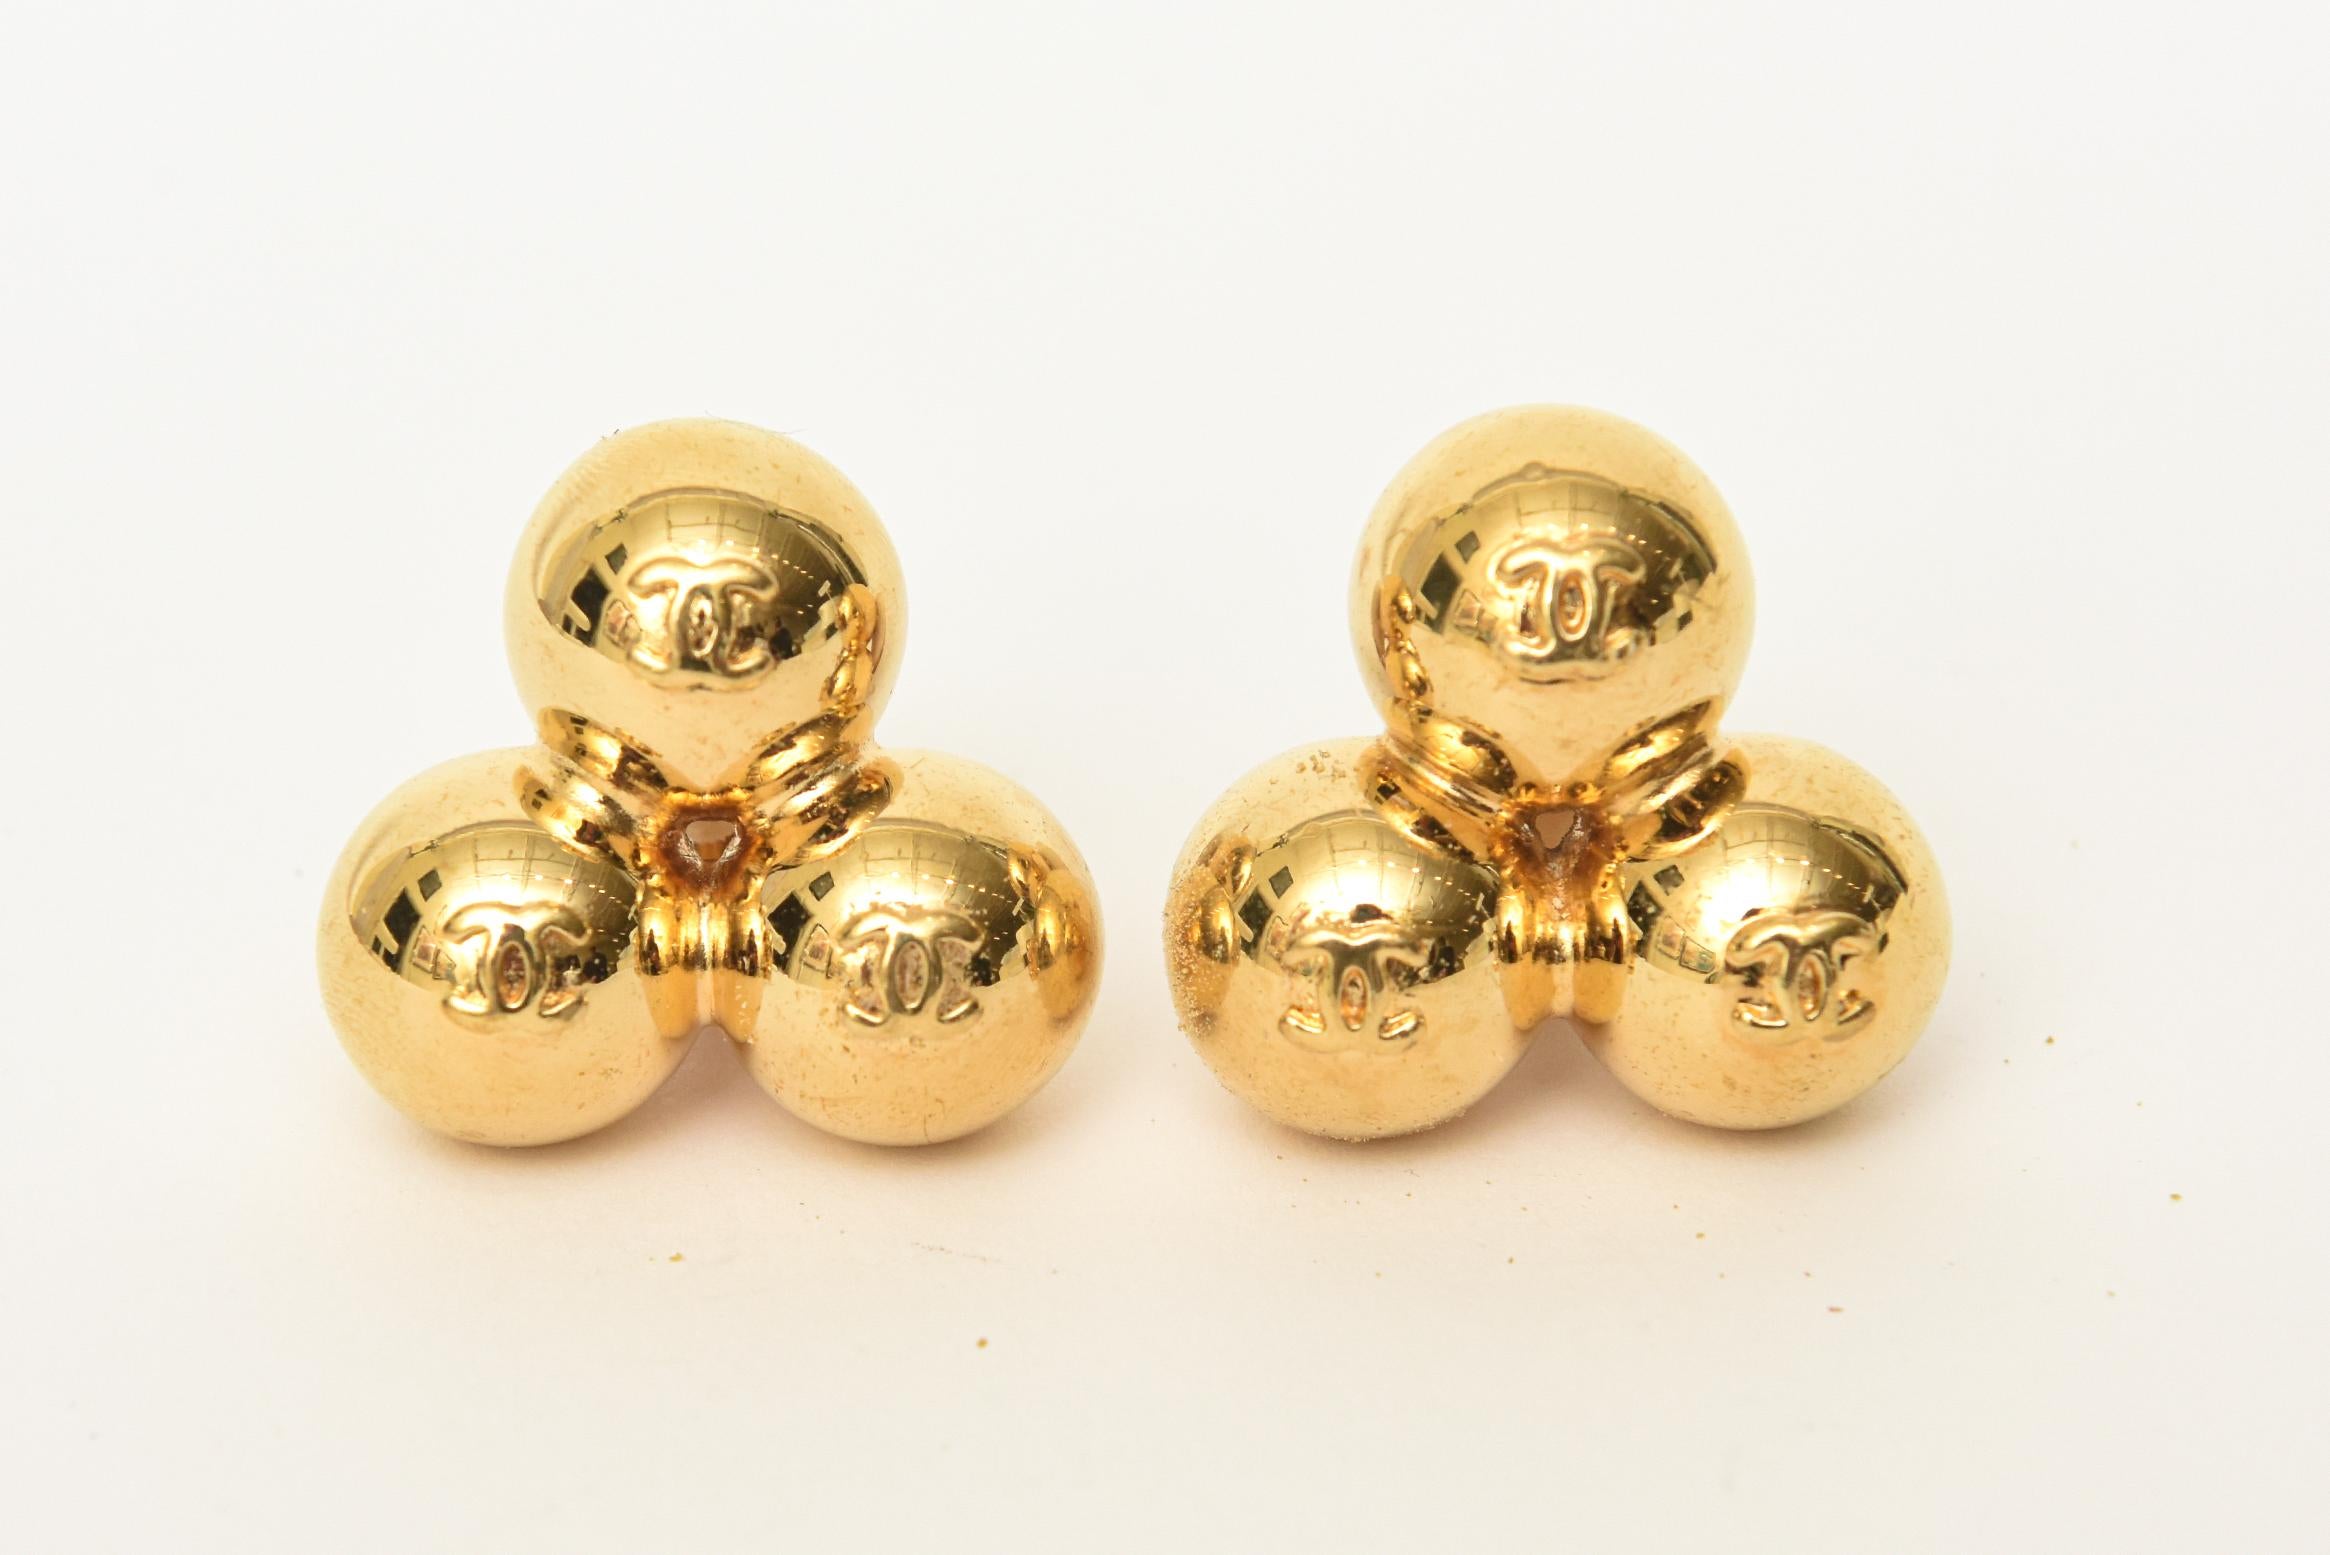 These ultra fabulous, unusual and sculptural signed period vintage Chanel gold plated 3 cluster ball or sphere clip on earrings are so chic. They are geometric and have the signature interlocking CC's on each ball. From the 90's. They are signed